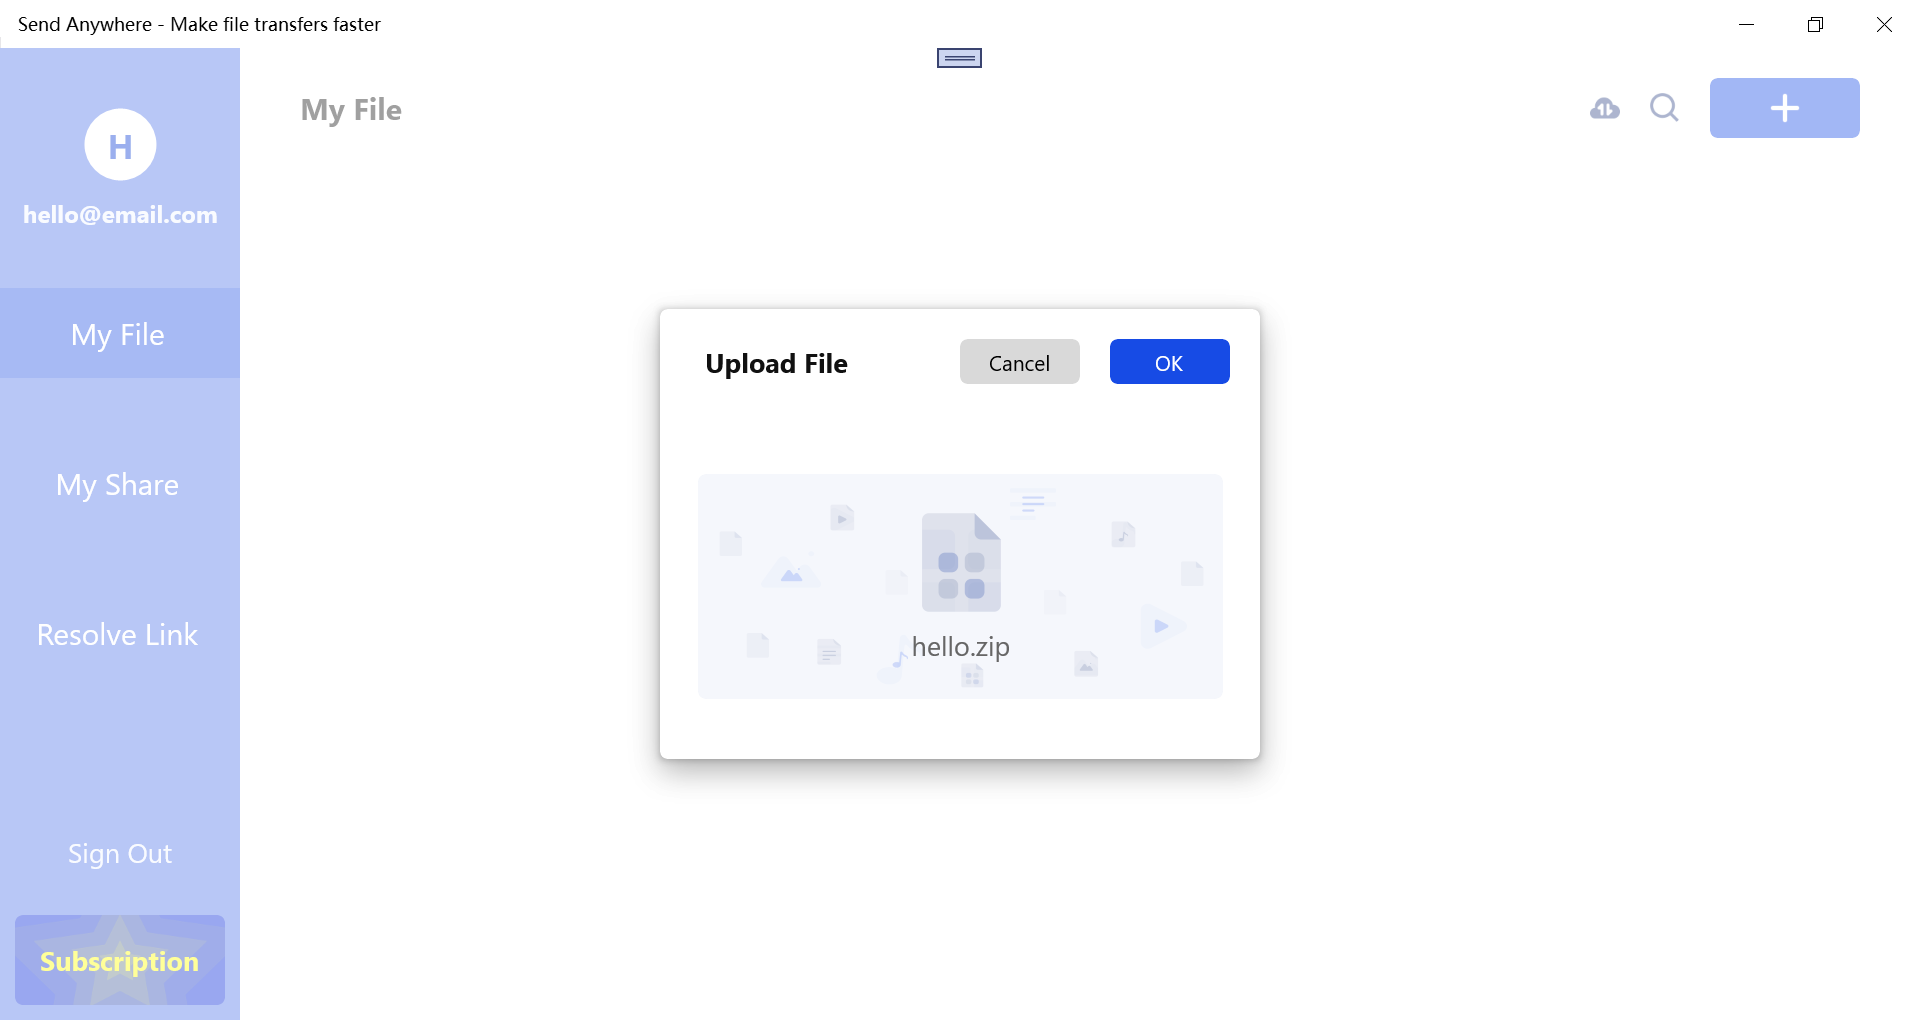 Send Anywhere - Make file transfers faster